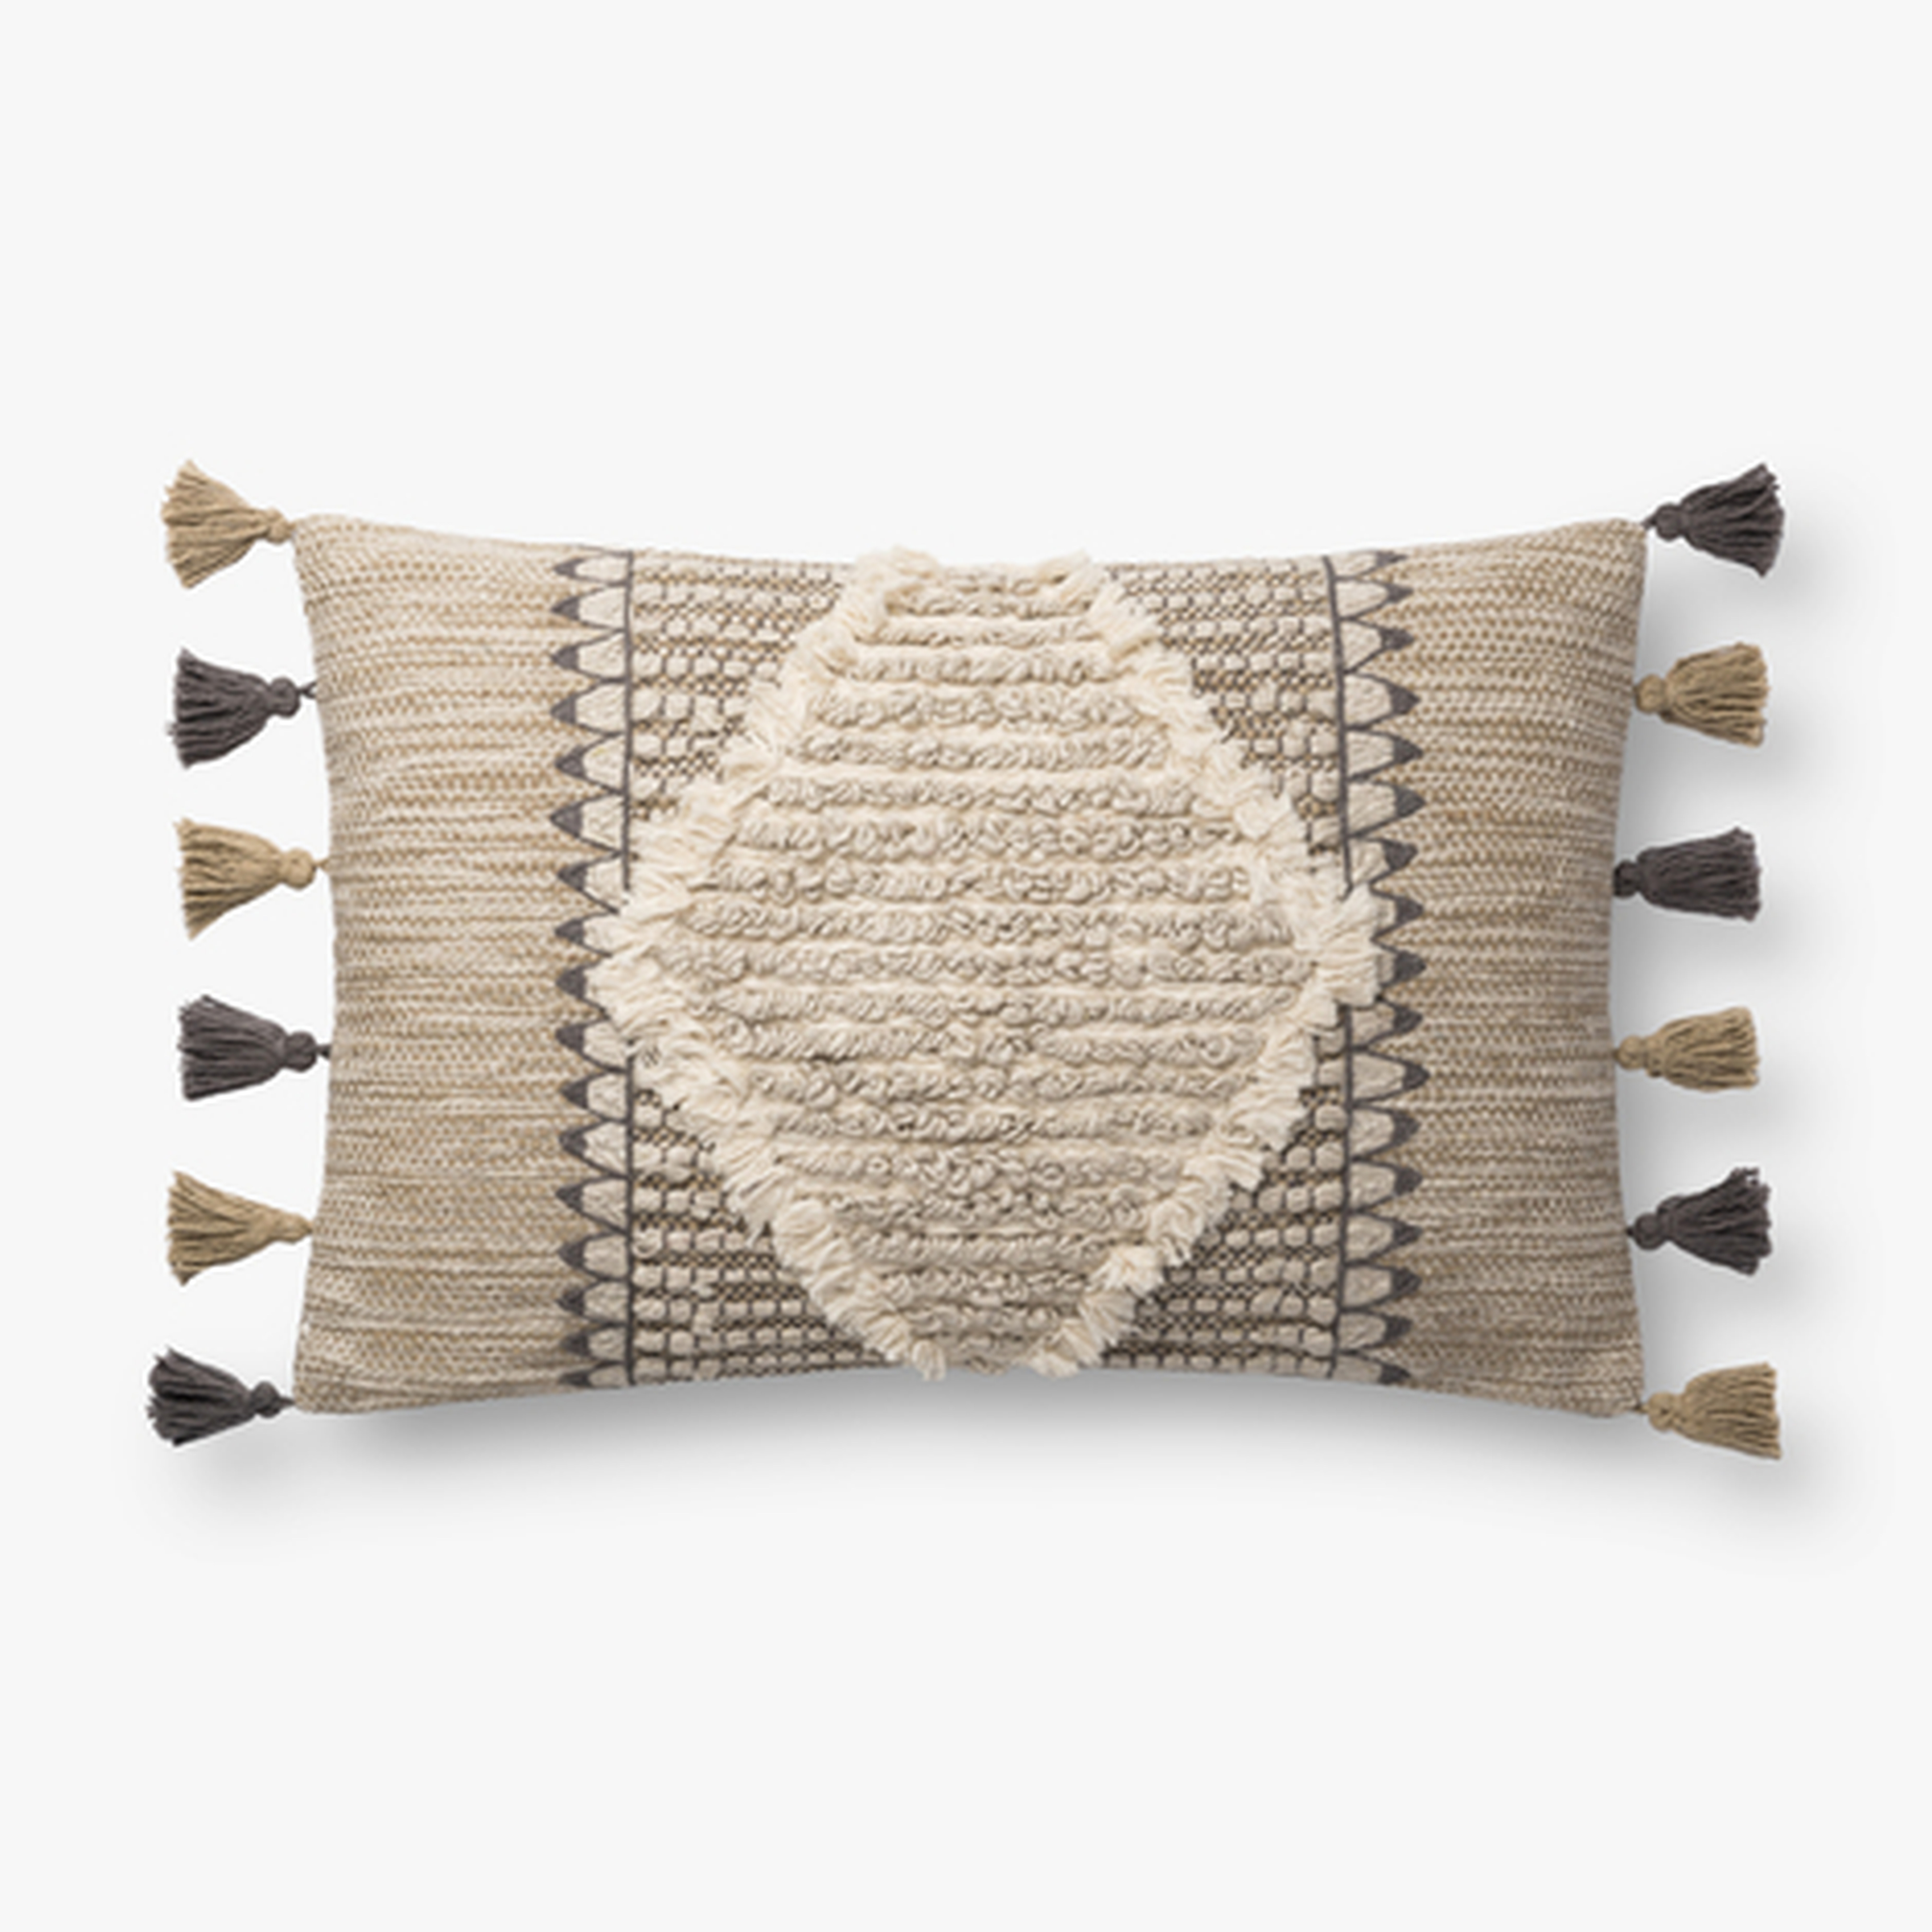 SAVOIE LUMBAR PILLOW, BEIGE AND MULTI, ED ELLEN DEGENERES CRAFTED BY LOLOI - with polyester fill - Lulu and Georgia